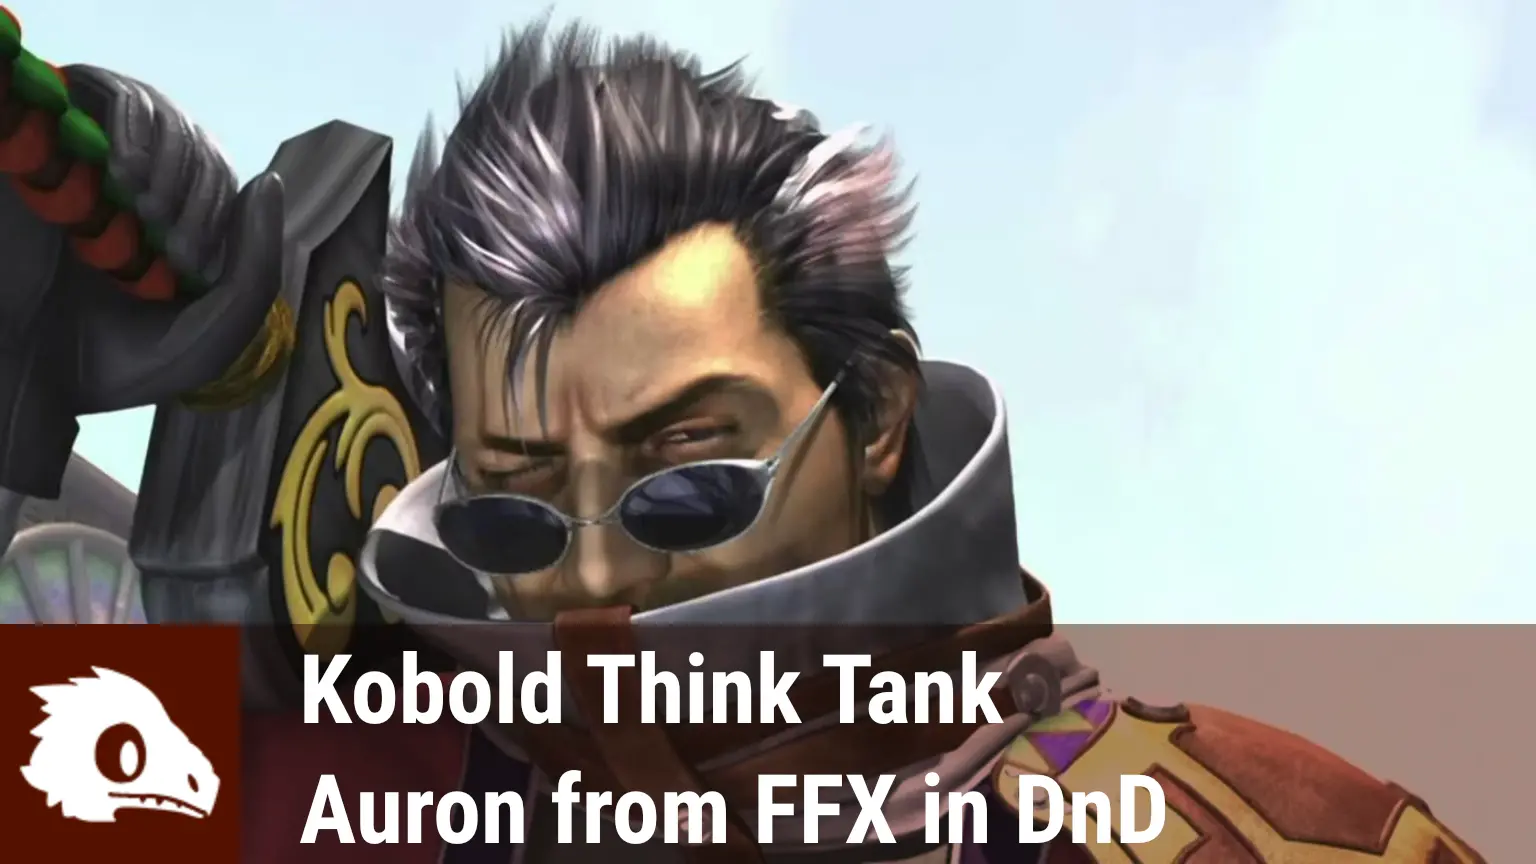 Graphic of Auron from Final Fantasy X